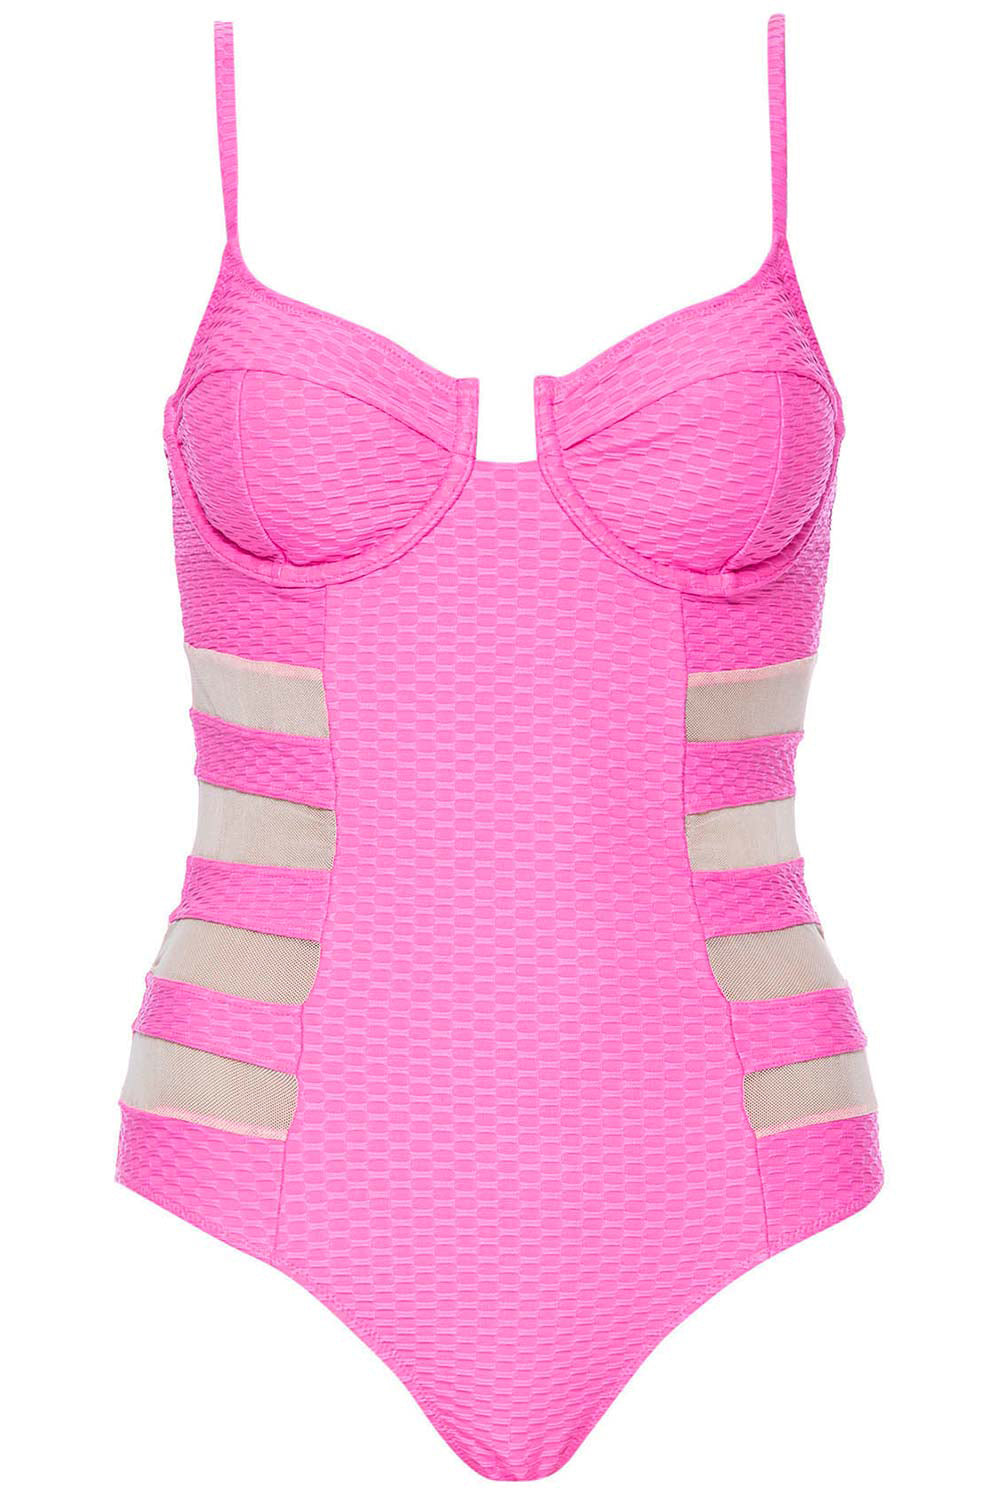 Mesh Underwire Pink Swimsuit on white background front view.